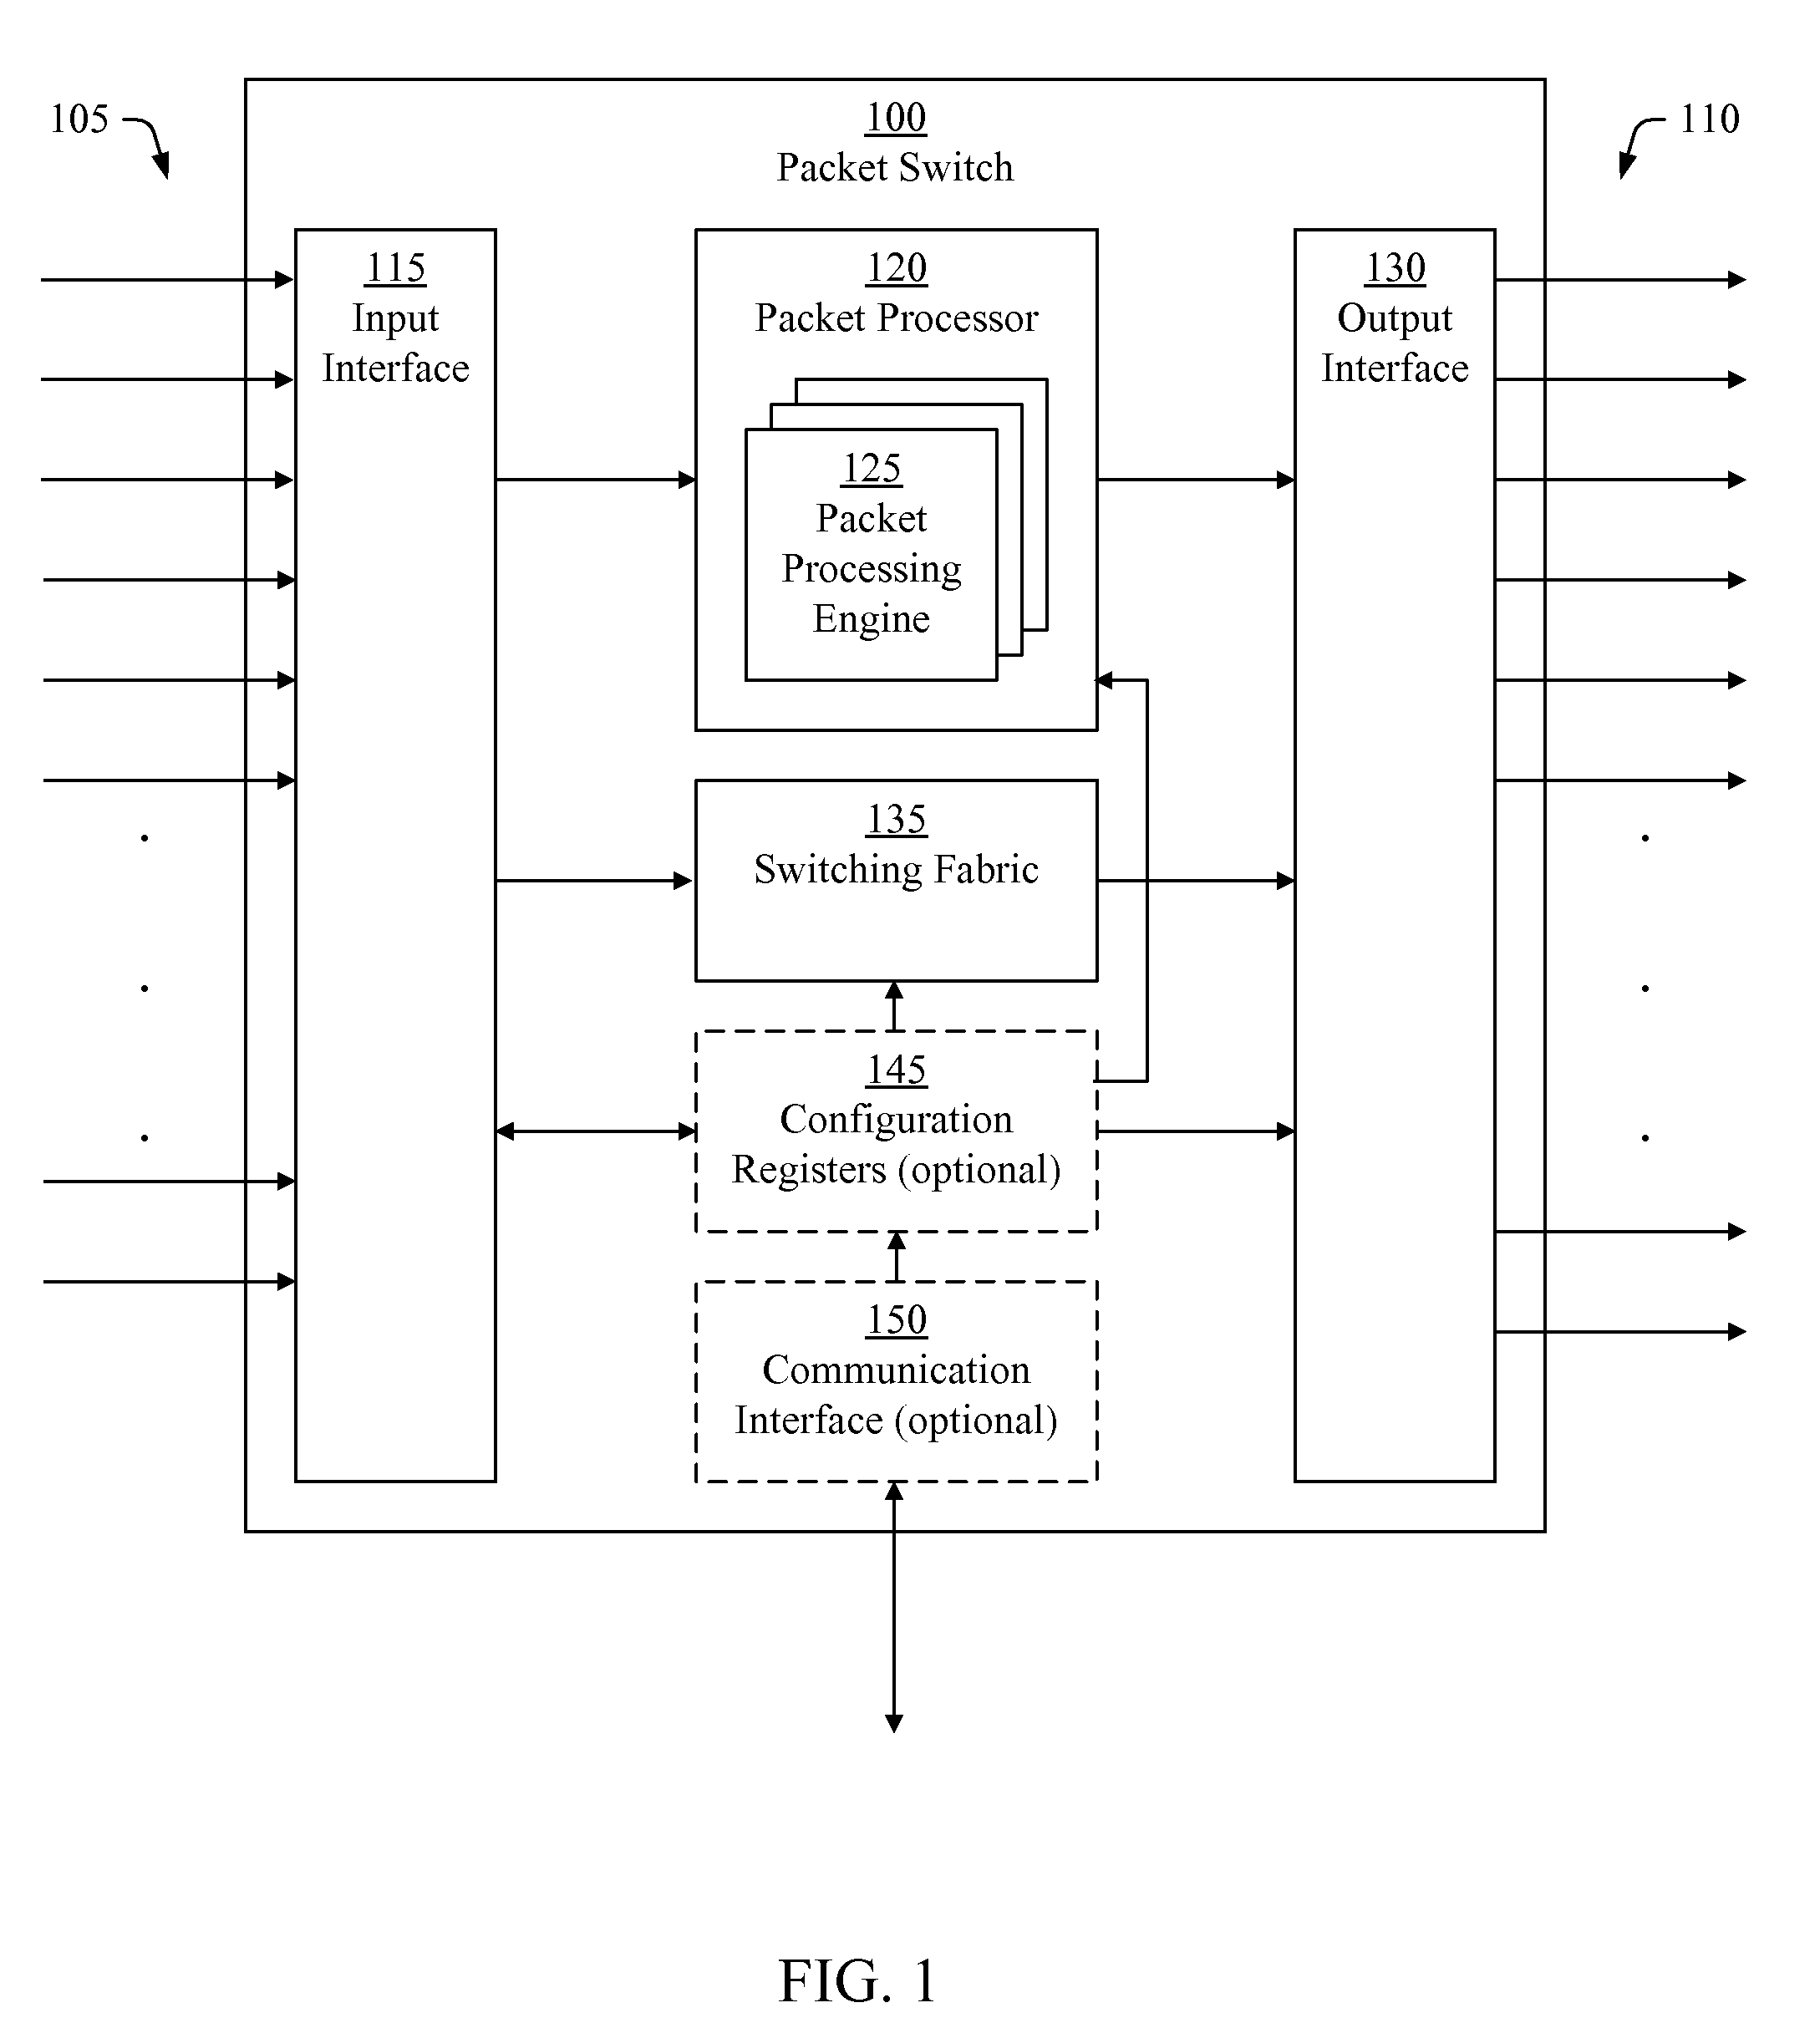 Packet processing in a packet switch with improved output data distribution